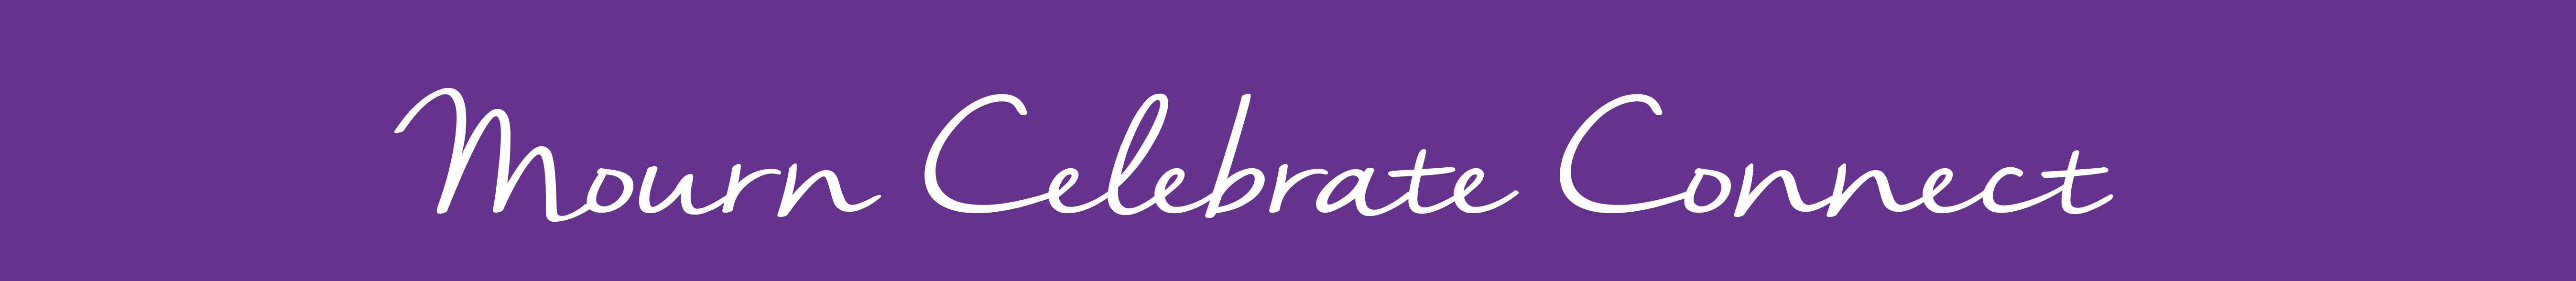 Purple banner with script like text that reads Mourn Celebrate Connects